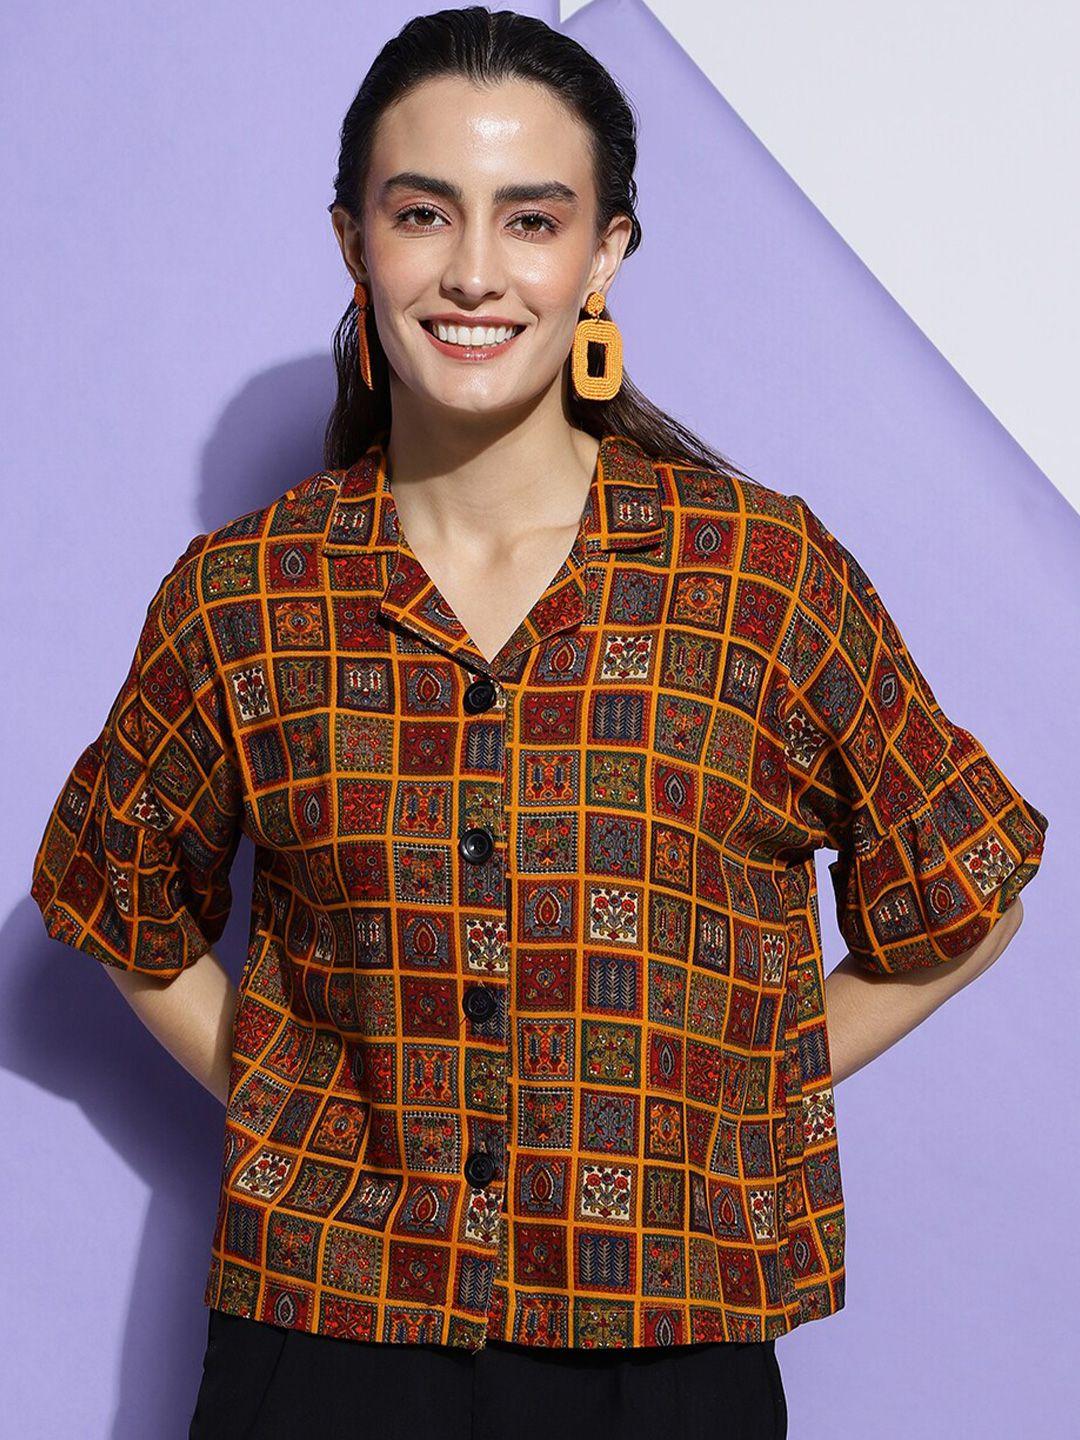 clemira mustard yellow print roll-up sleeves ethnic georgette shirt style top